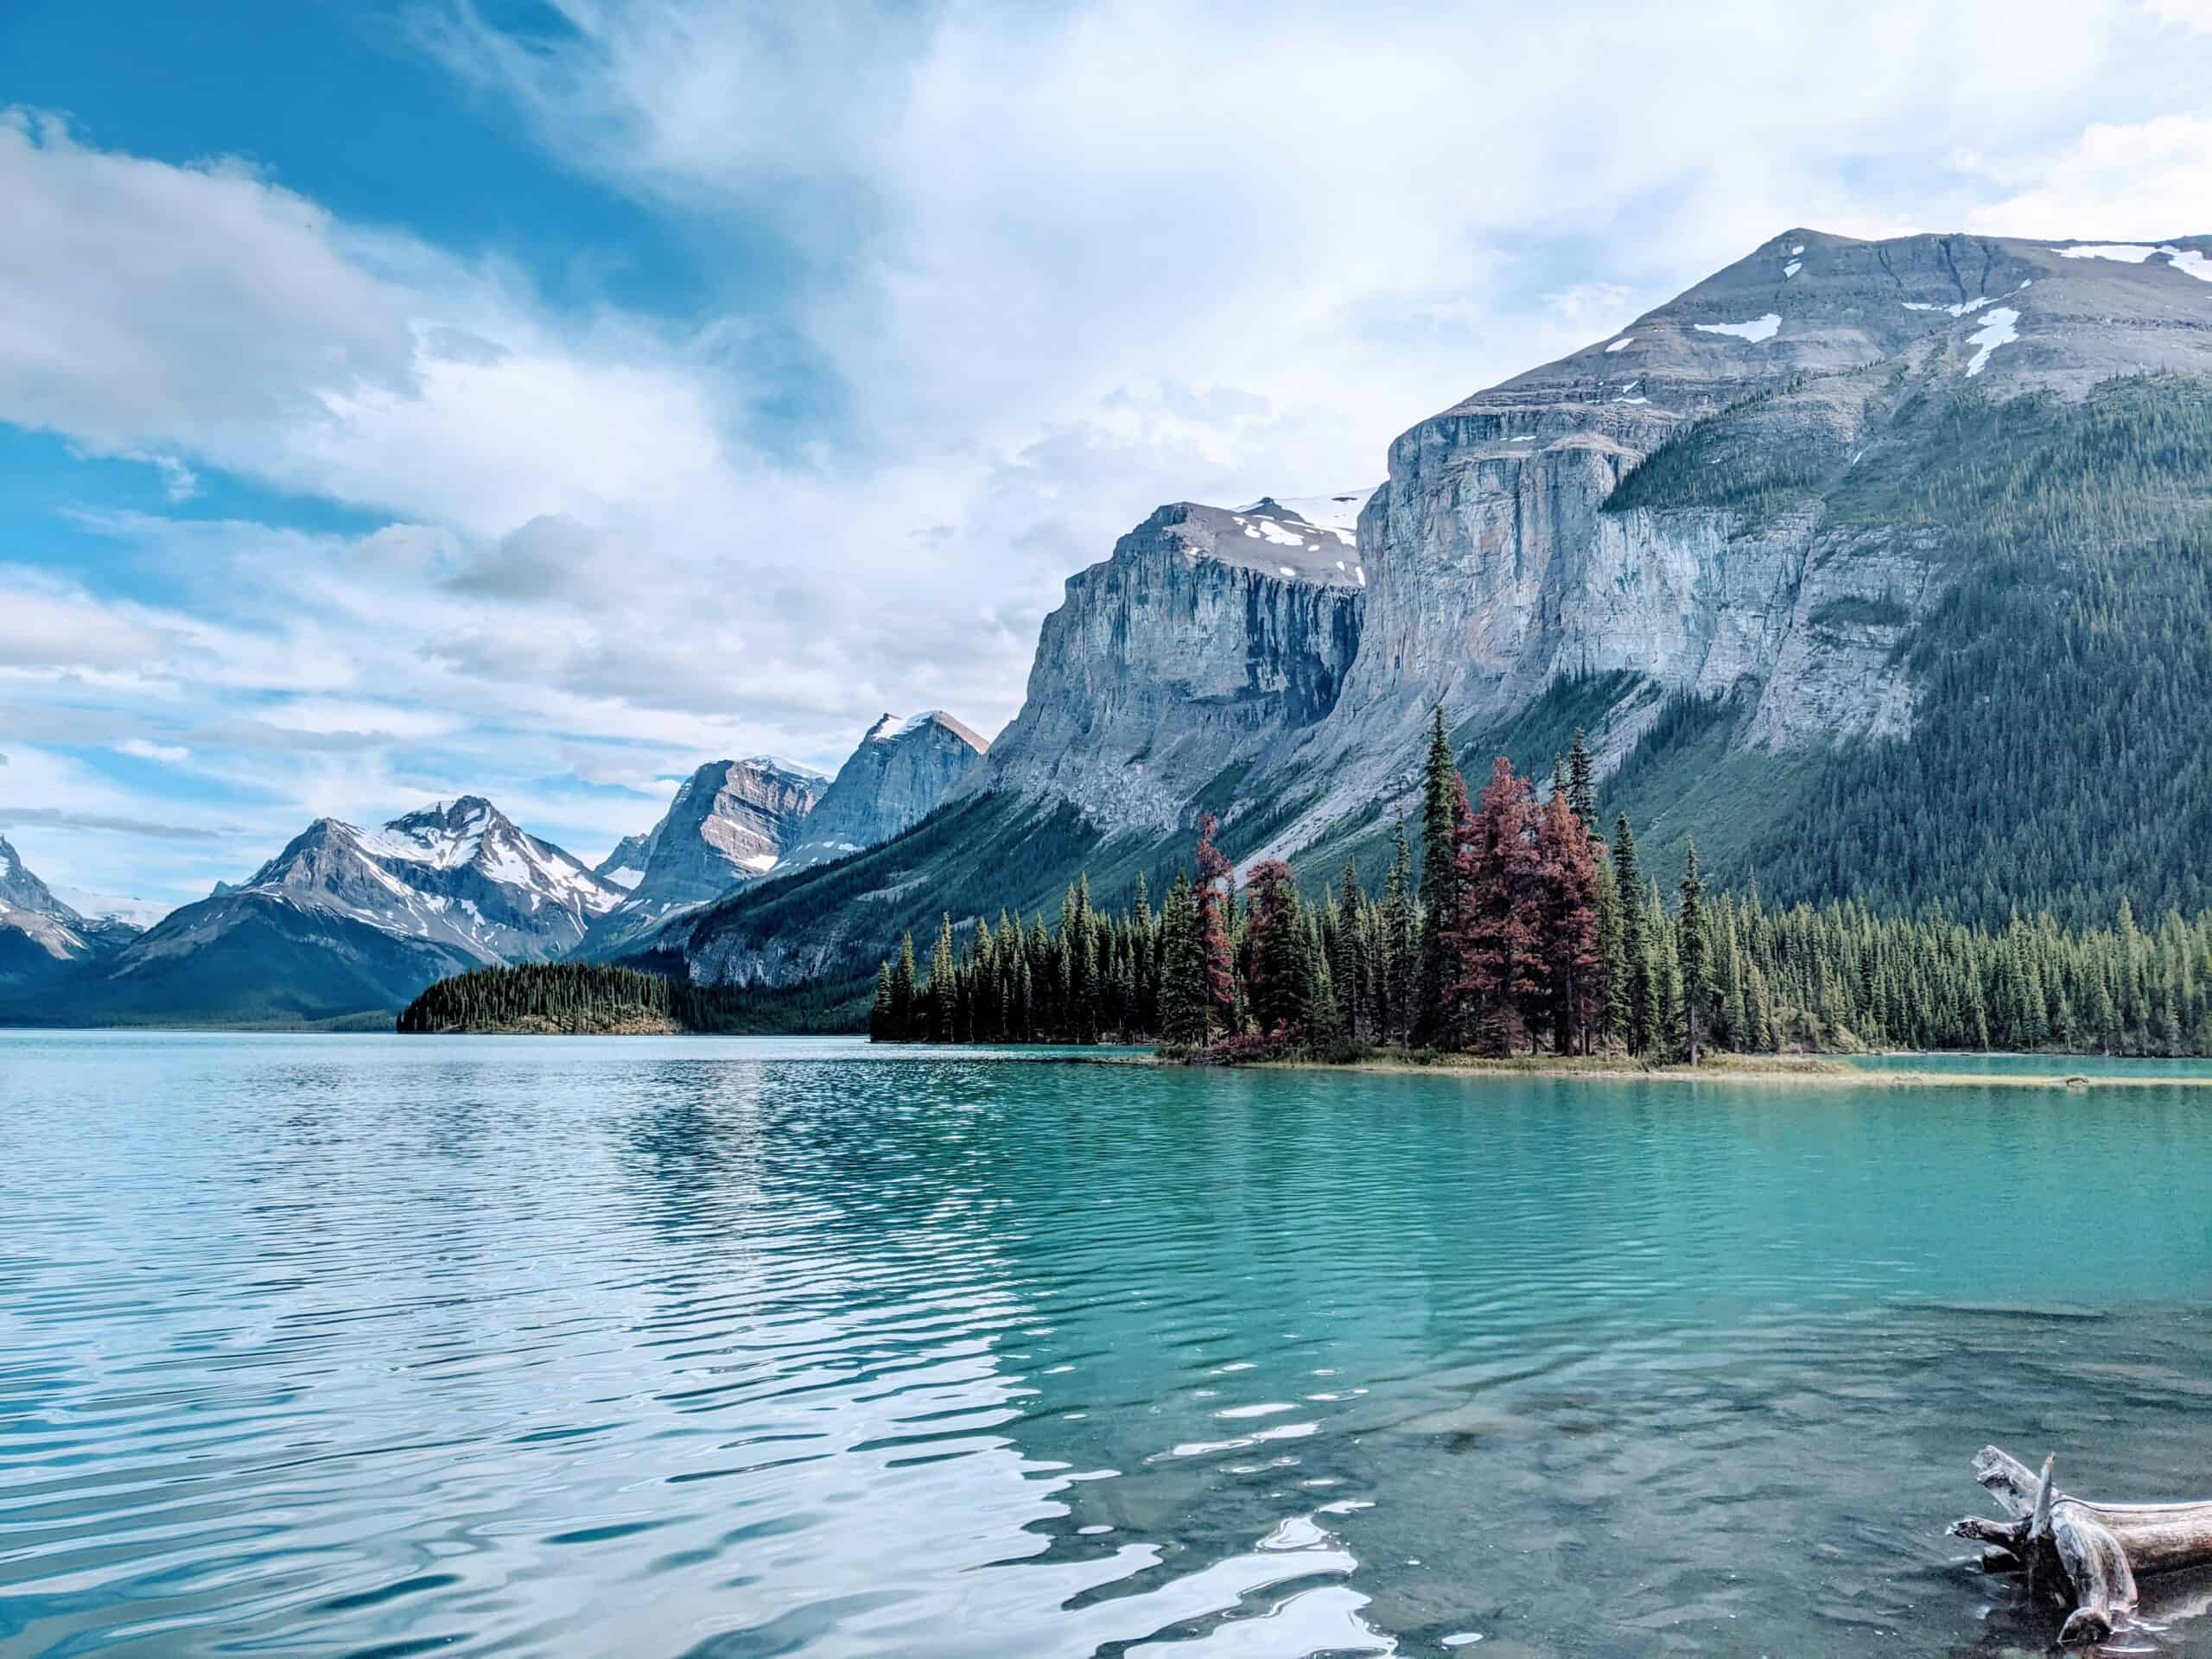 14 Things To Do in Jasper That Will Take Your Breath Away (2022)